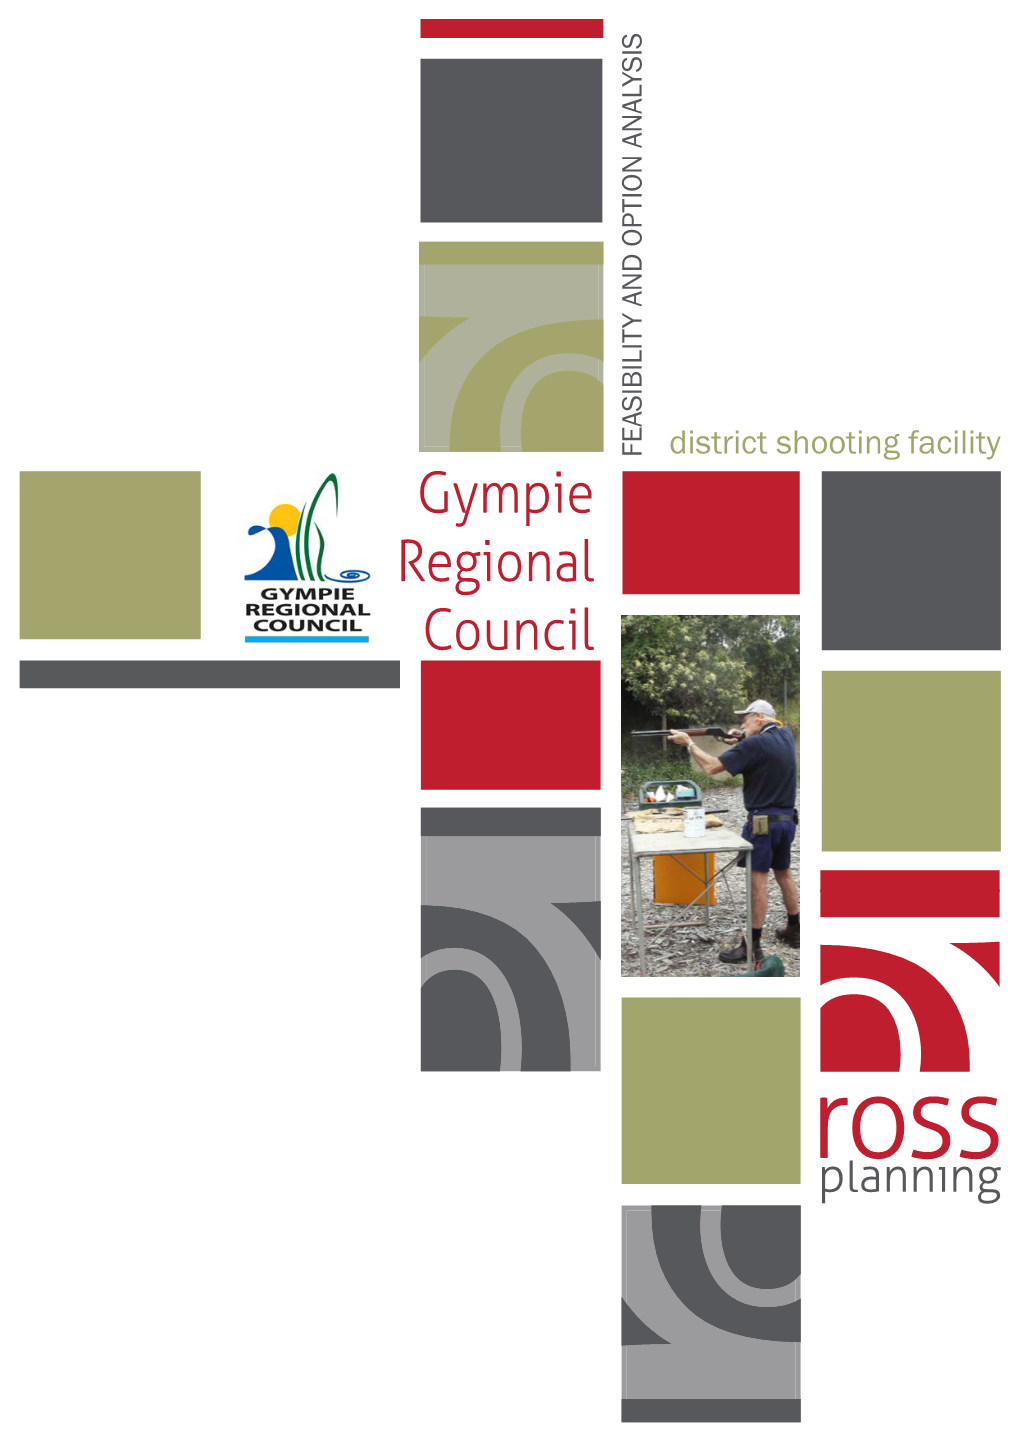 Gympie Pistol Club (Qld Branch) Are Looking to Develop a 500M Range in the Rv